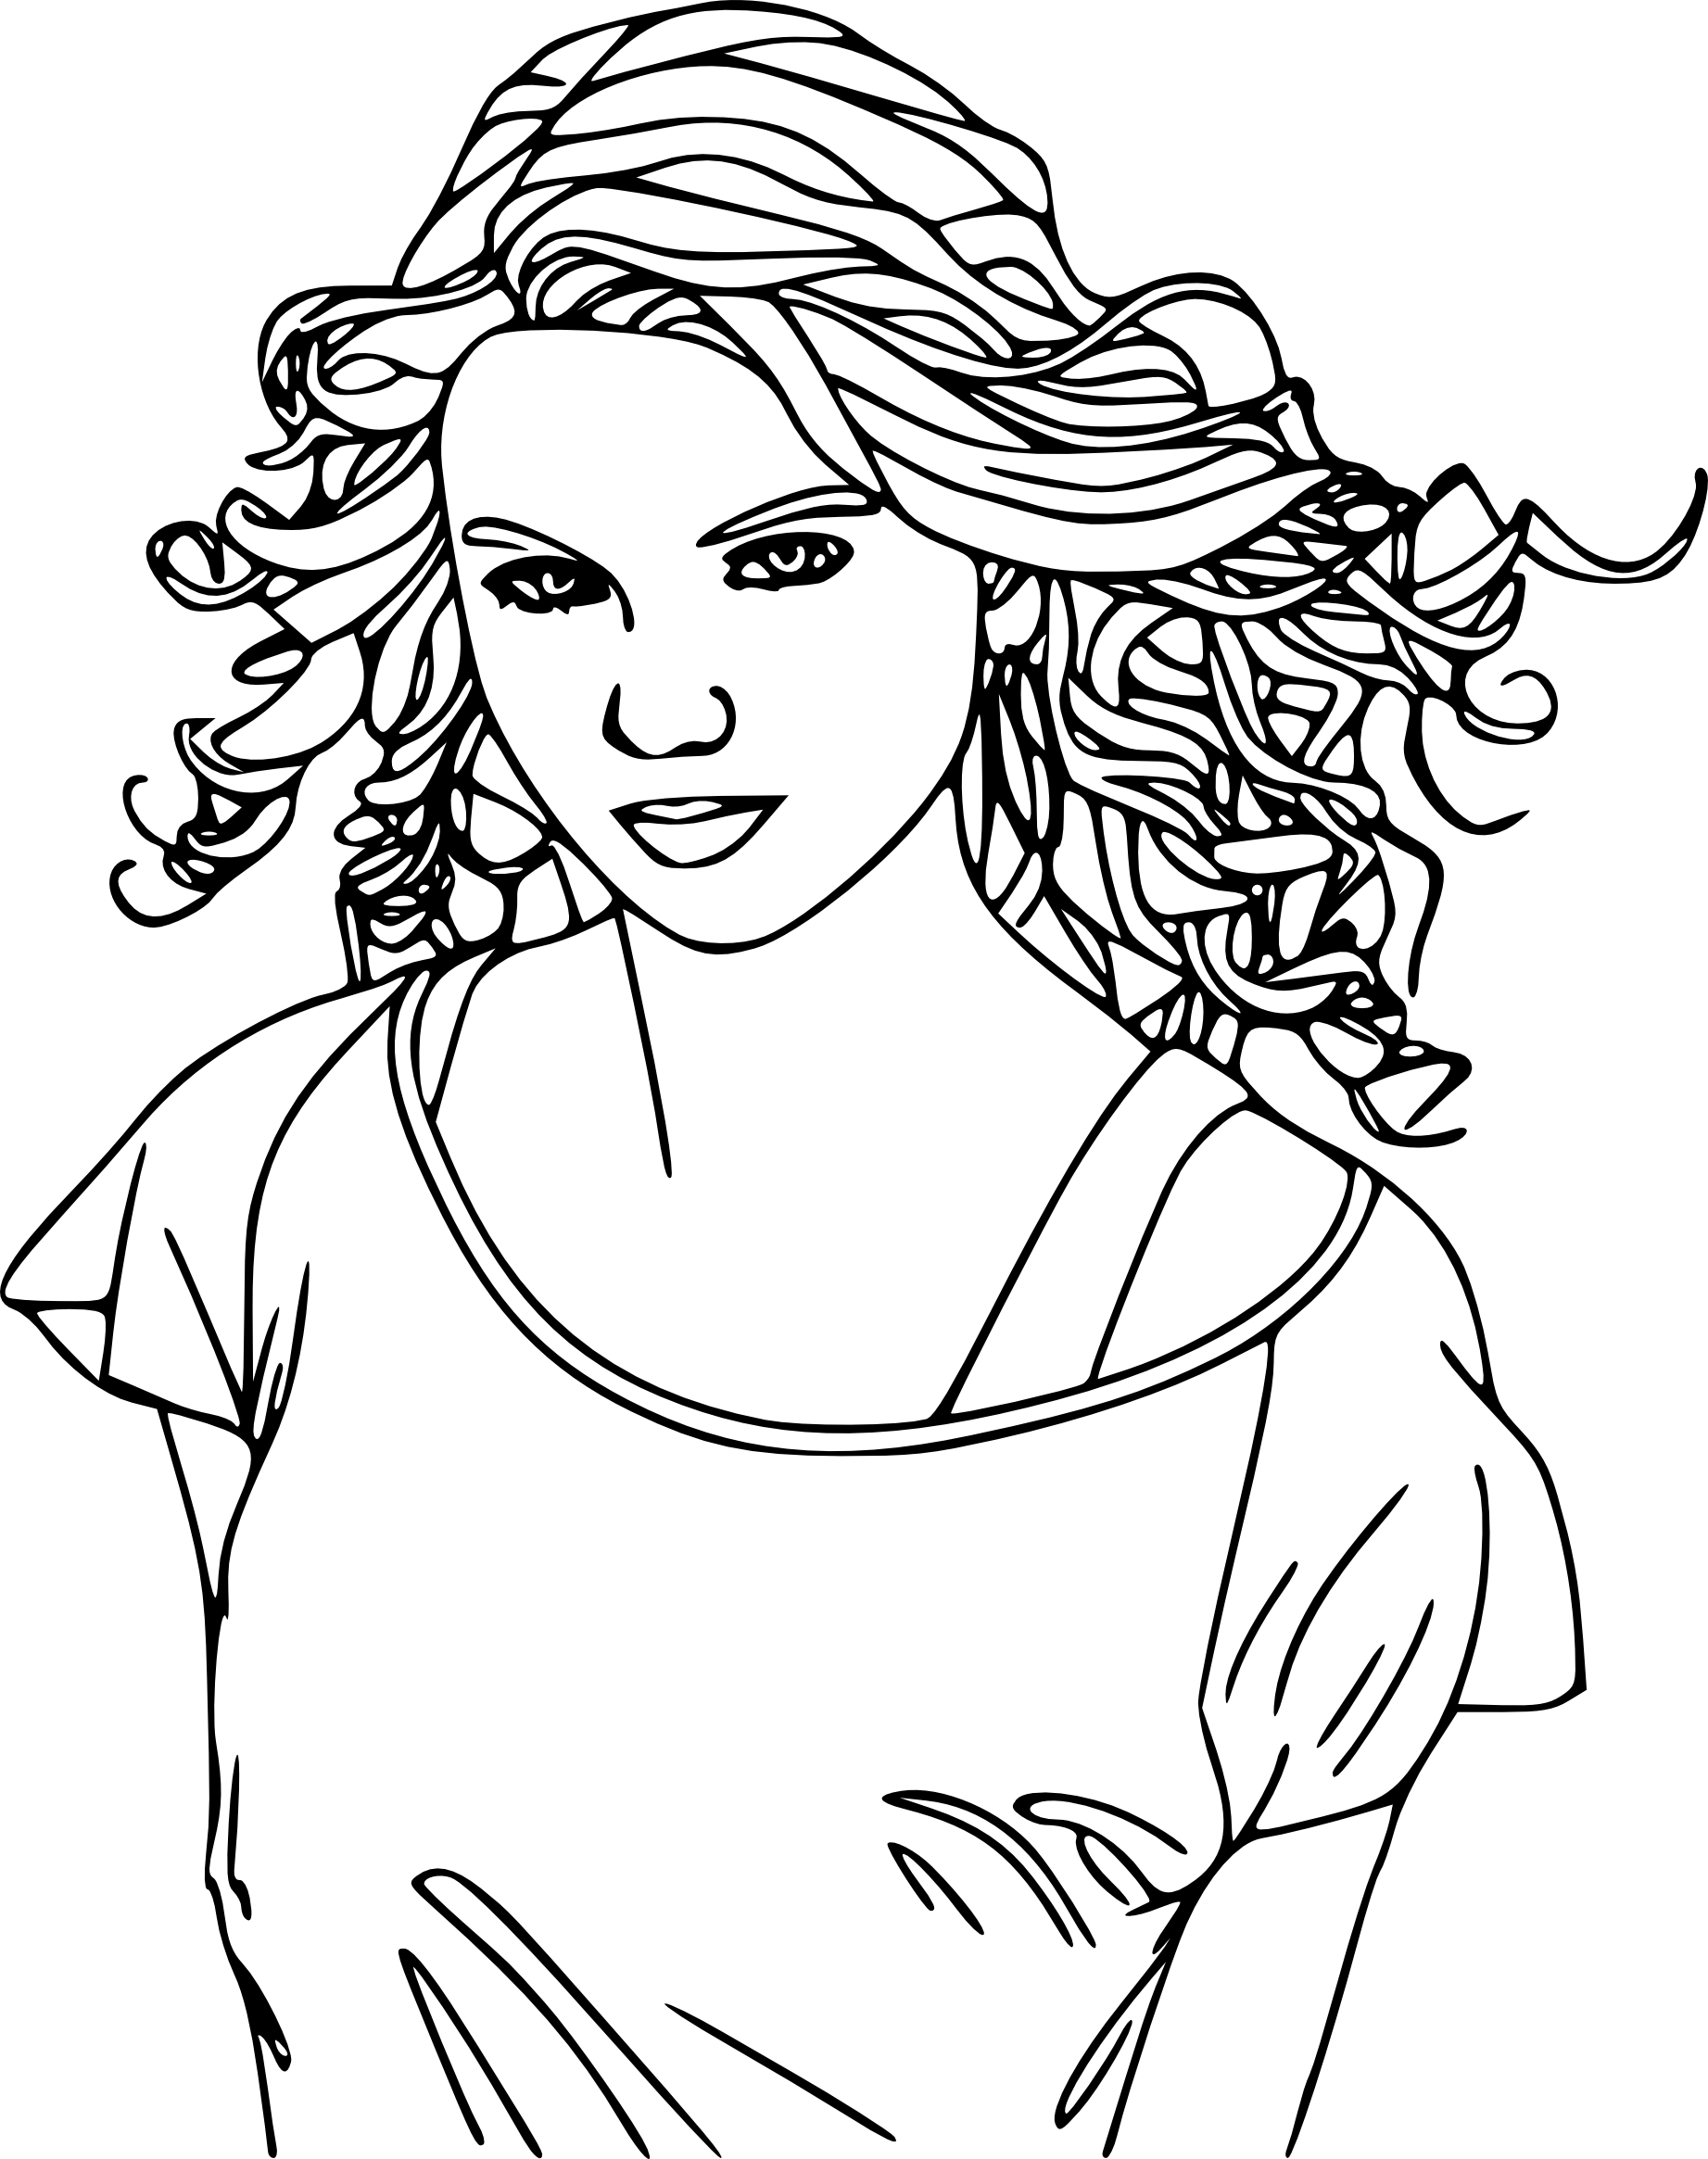 Taylor Swift Hair coloring page